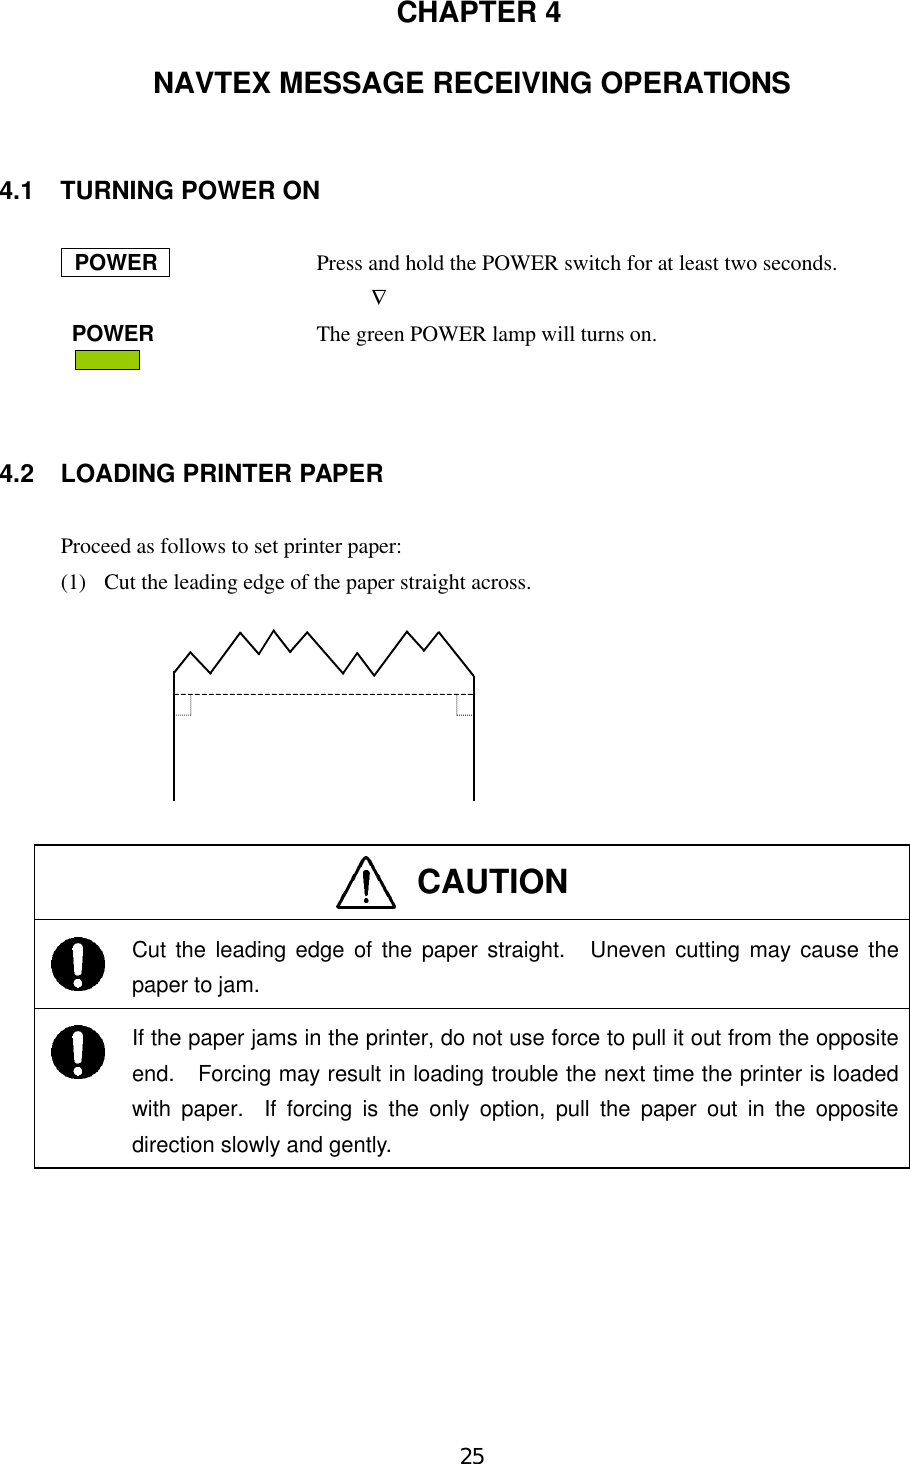 25 CHAPTER 4NAVTEX MESSAGE RECEIVING OPERATIONS4.1 TURNING POWER ON       POWER            Press and hold the POWER switch for at least two seconds.             ∇ POWER         The green POWER lamp will turns on.                                    4.2 LOADING PRINTER PAPERProceed as follows to set printer paper:(1)  Cut the leading edge of the paper straight across.CAUTIONCut the leading edge of the paper straight.  Uneven cutting may cause thepaper to jam.If the paper jams in the printer, do not use force to pull it out from the oppositeend.  Forcing may result in loading trouble the next time the printer is loadedwith paper.  If forcing is the only option, pull the paper out in the oppositedirection slowly and gently.